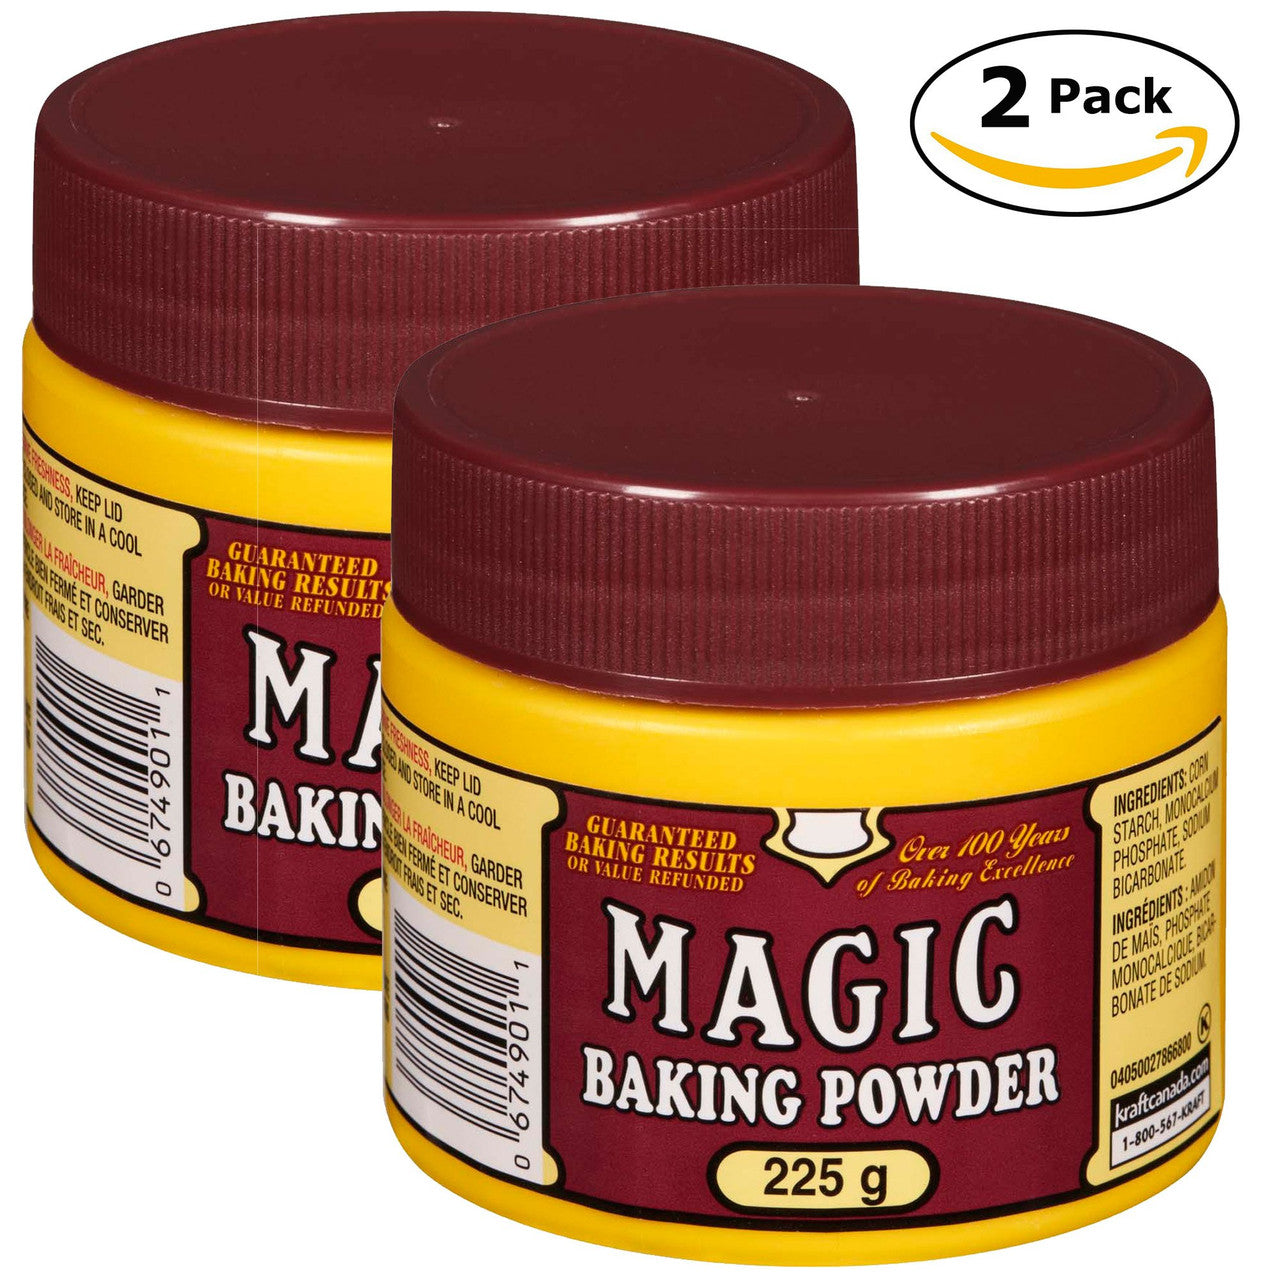 Magic Baking Powder 225g/7.9oz, 2ct, Total 450g/15.9oz, (Imported from Canada)